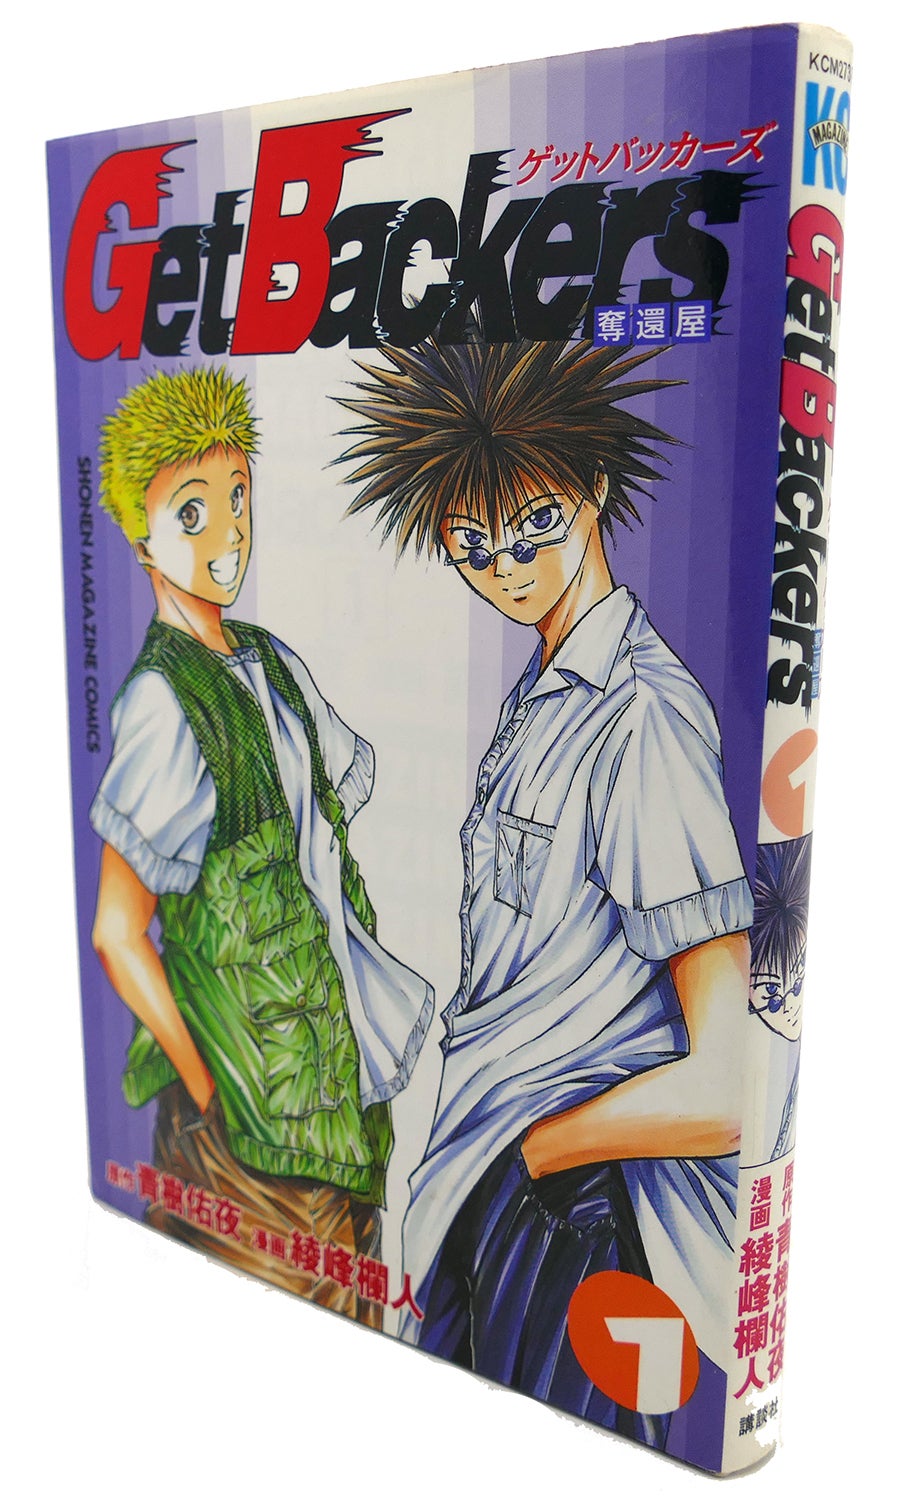 GET BACKERS VOL. 1 Text in Japanese. a Japanese Import. Manga